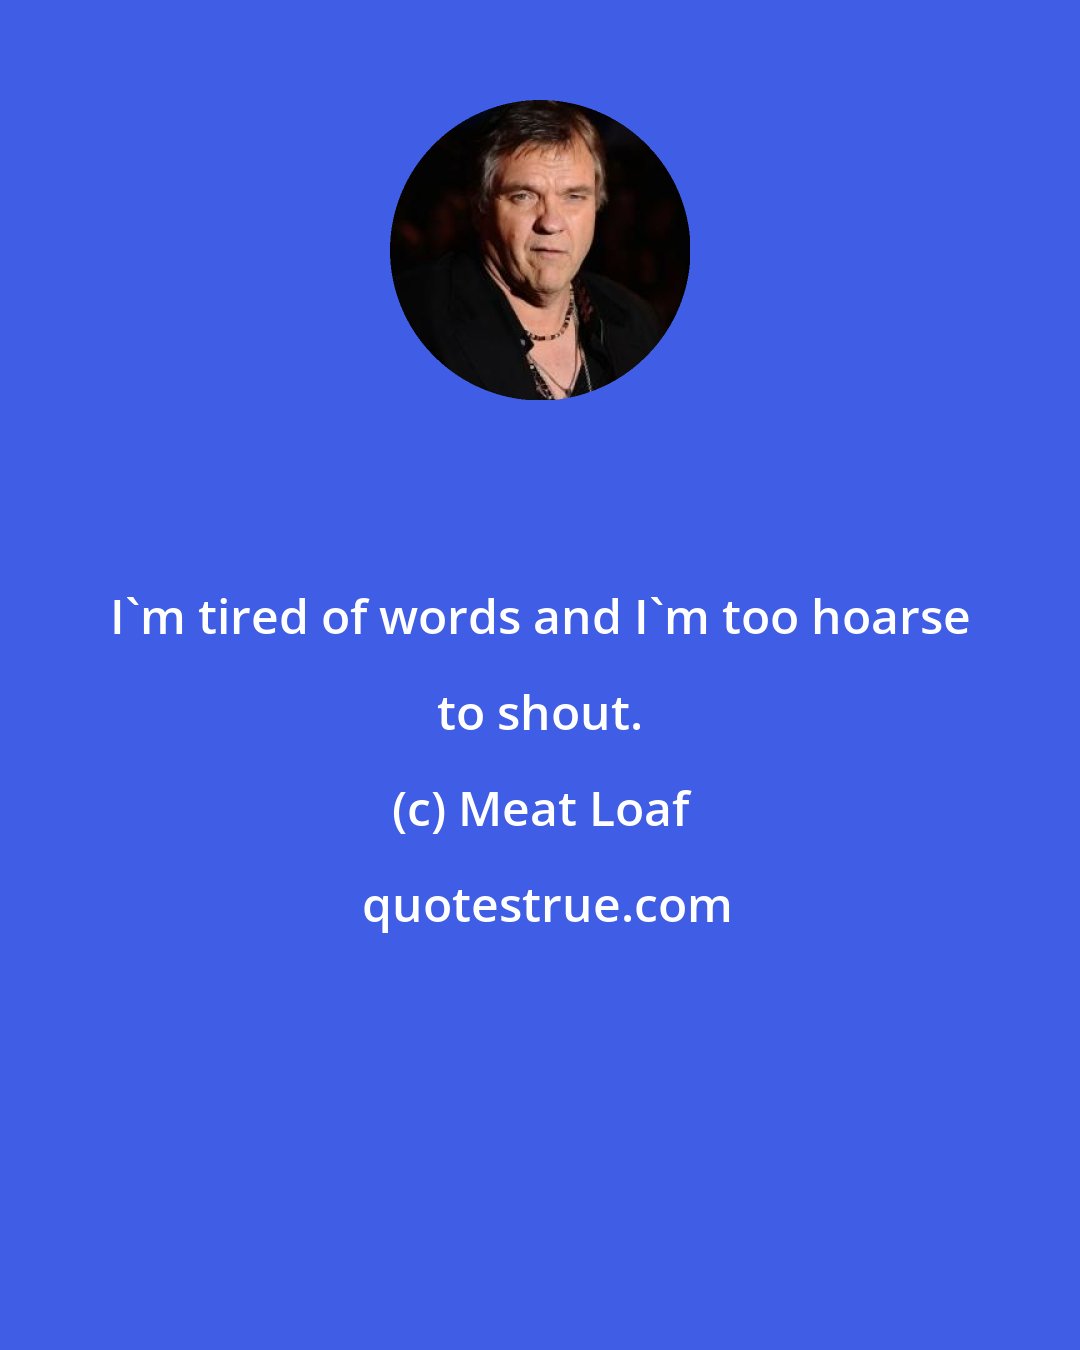 Meat Loaf: I'm tired of words and I'm too hoarse to shout.